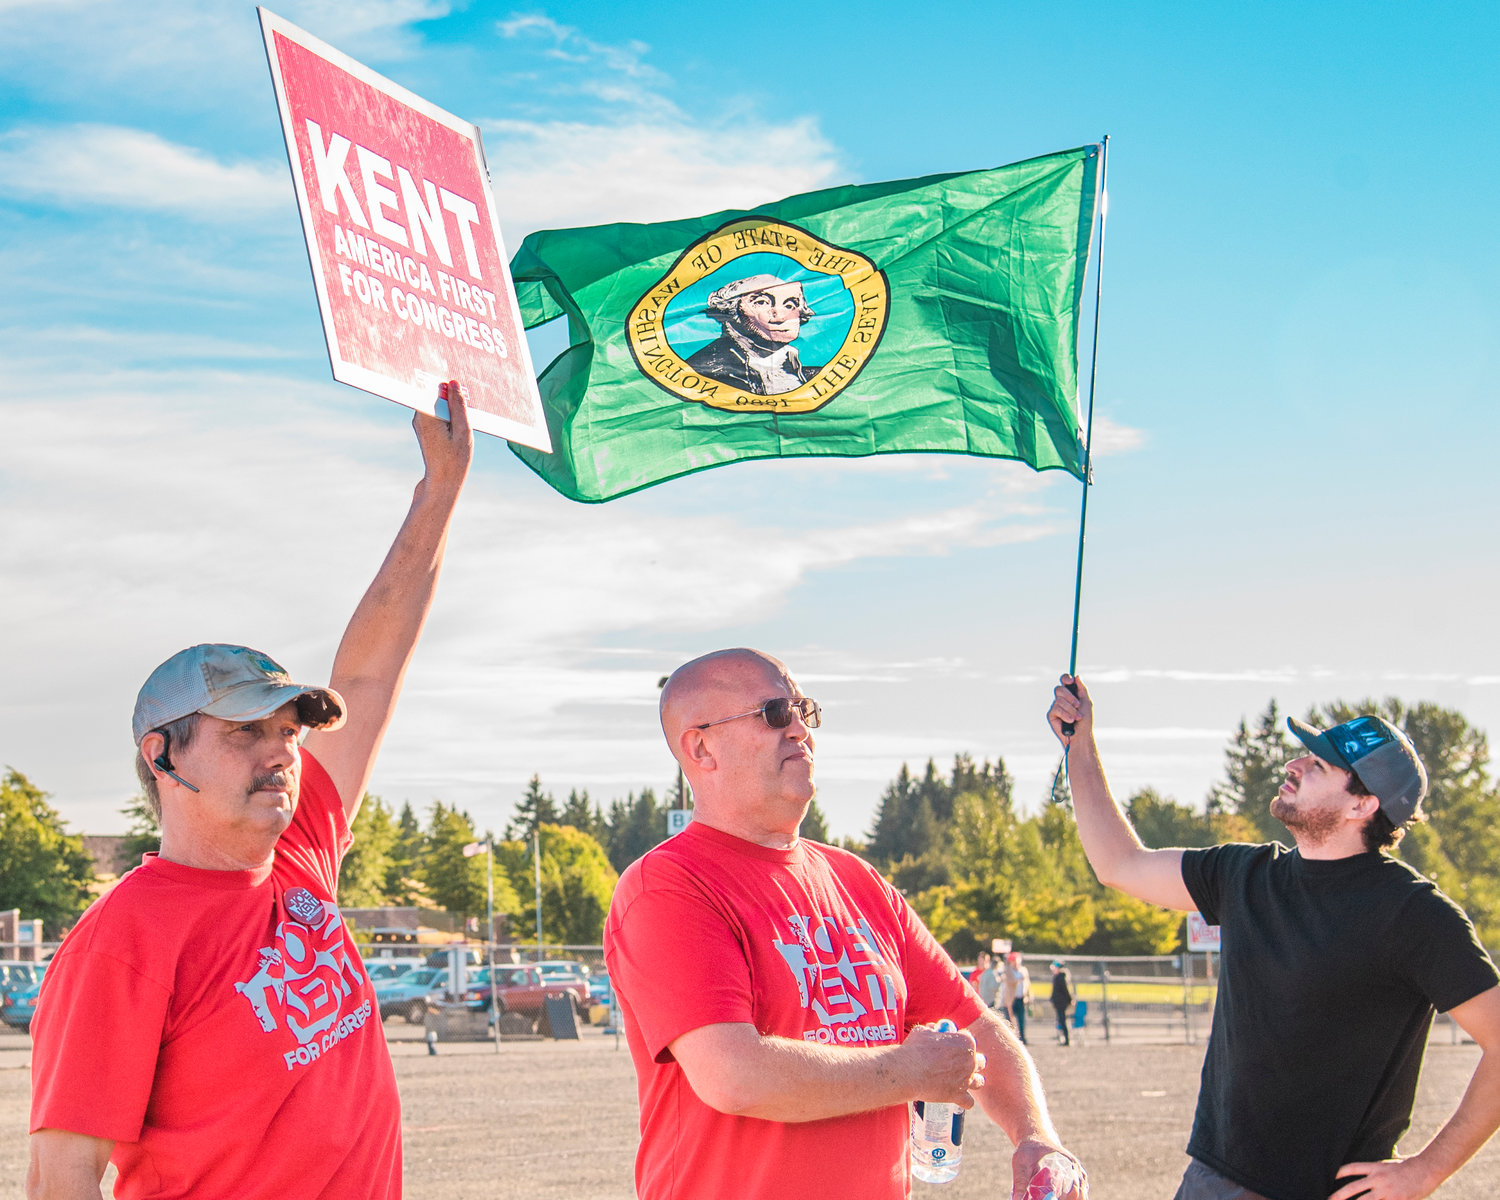 Supporters of Joe Kent are pictured at a rally in Clark County Monday.